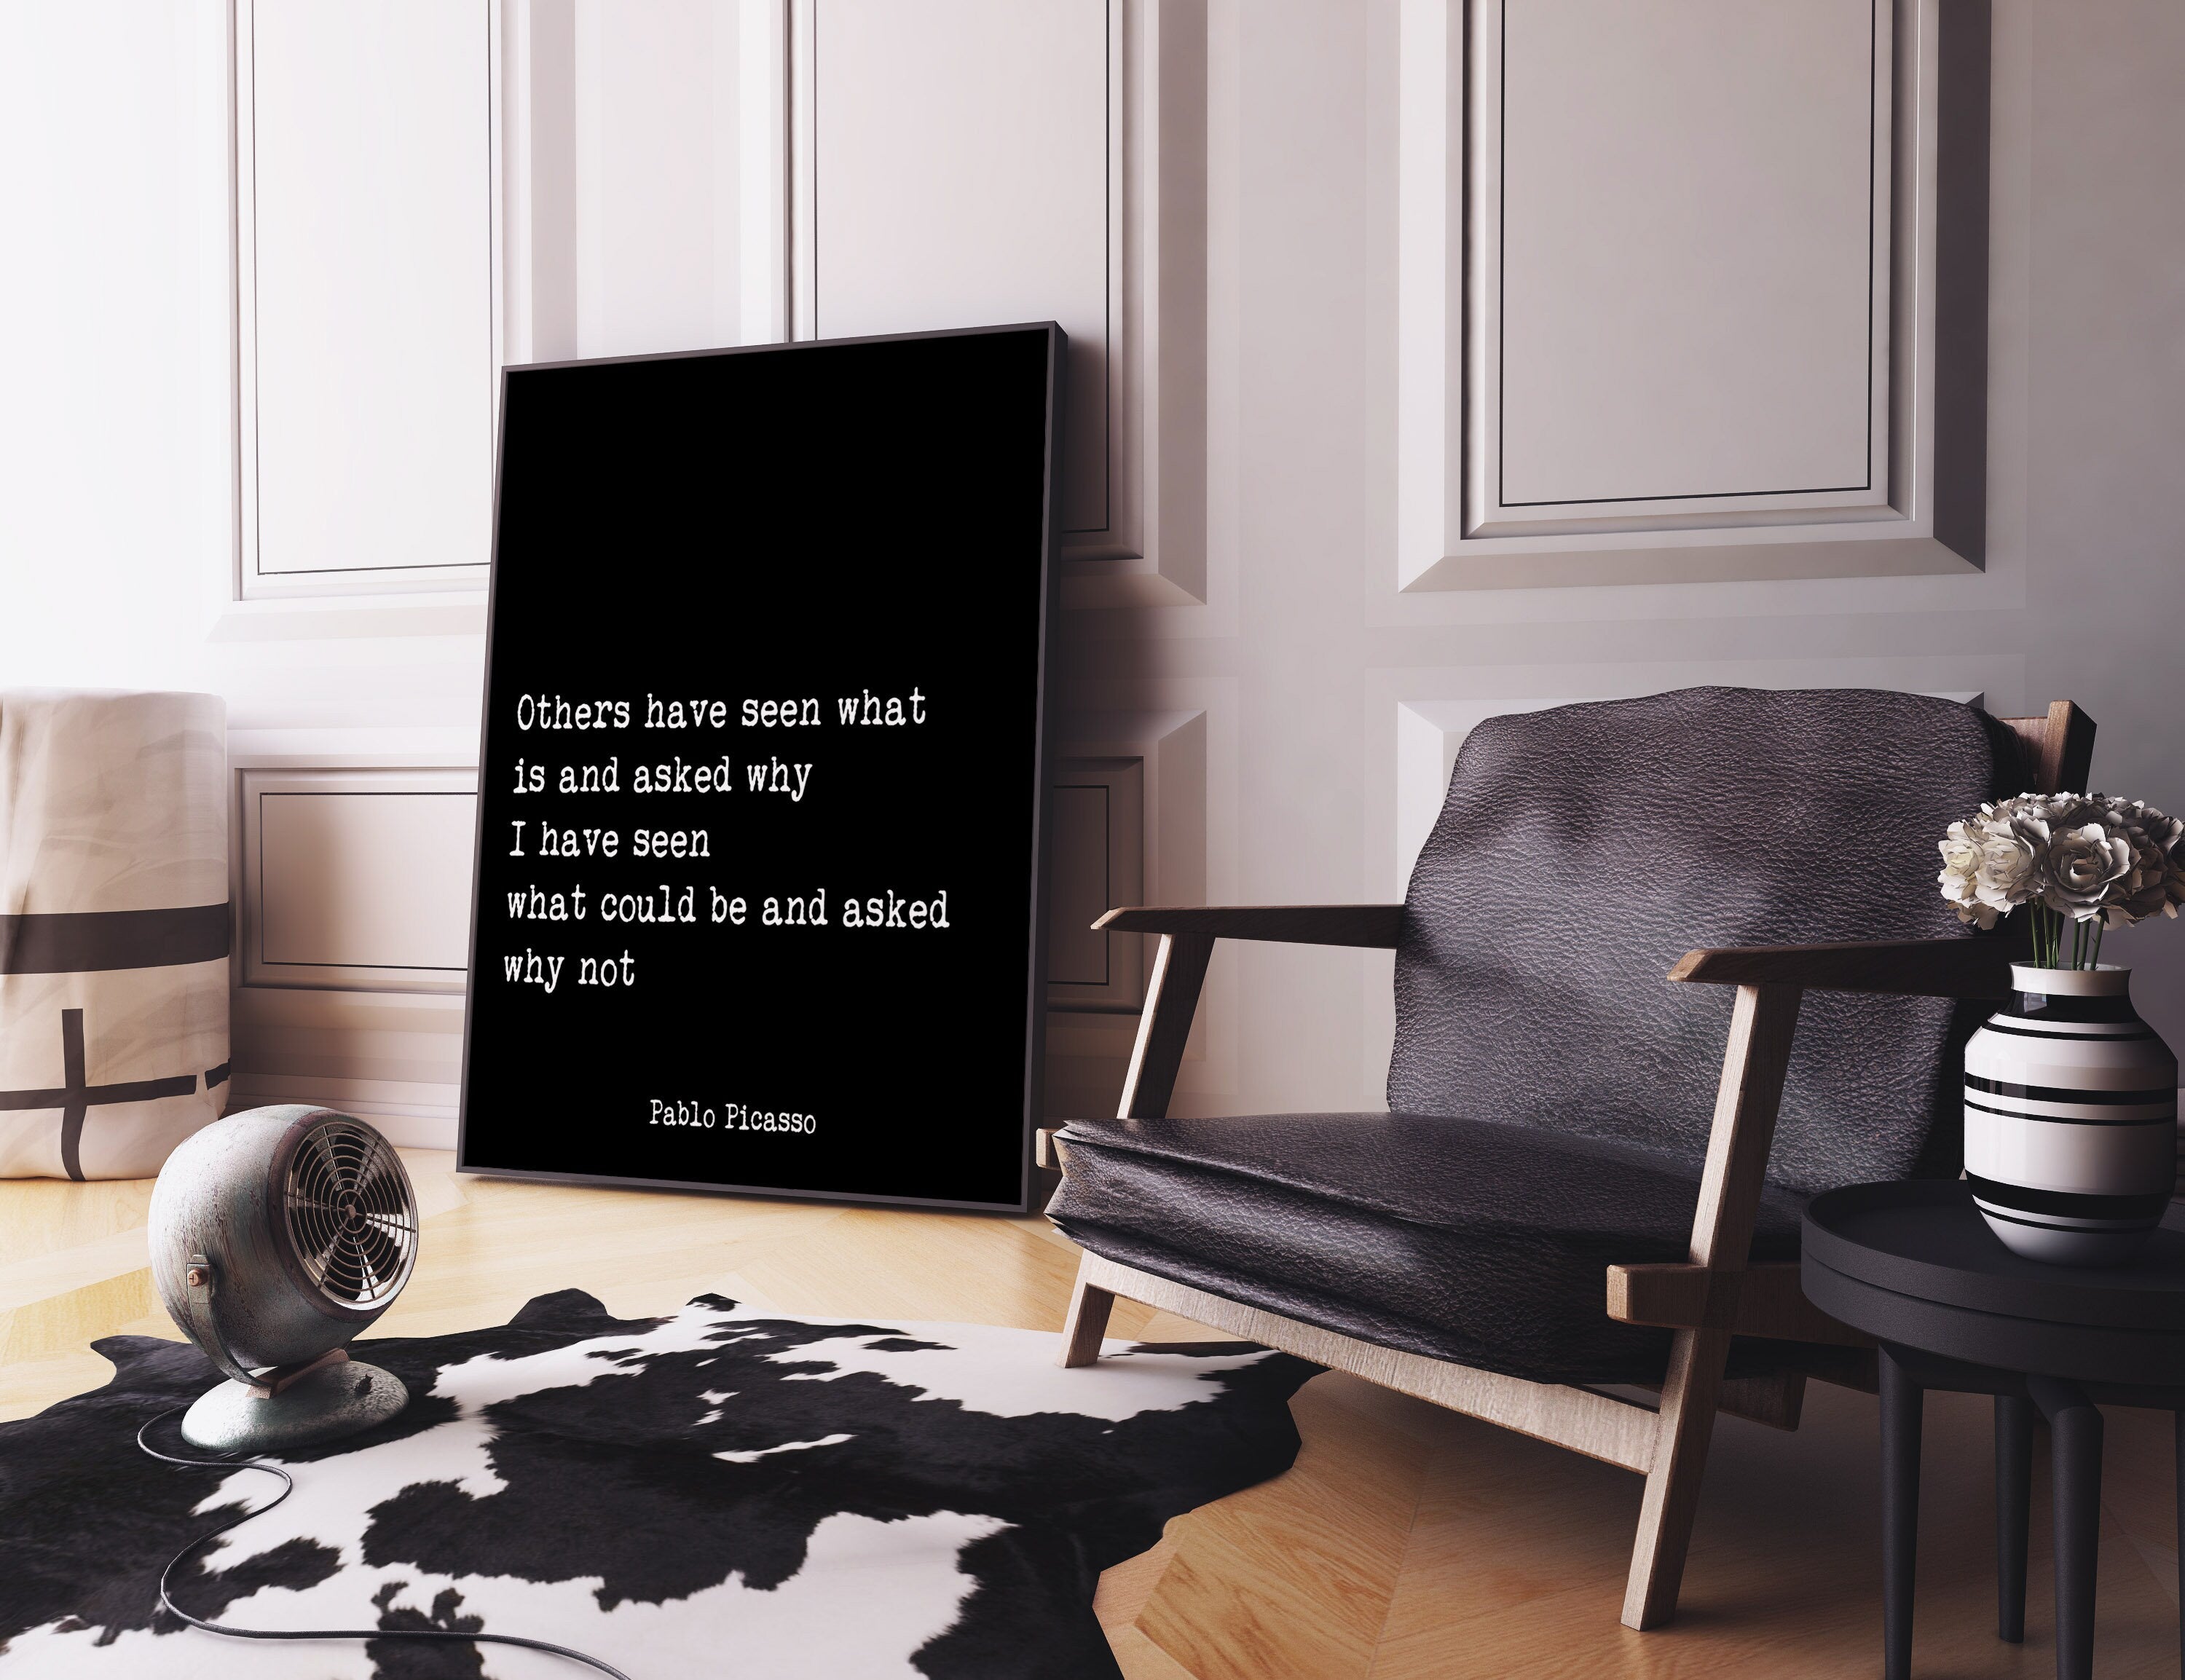 Pablo Picasso Quote Print, Others have seen what is and asked why